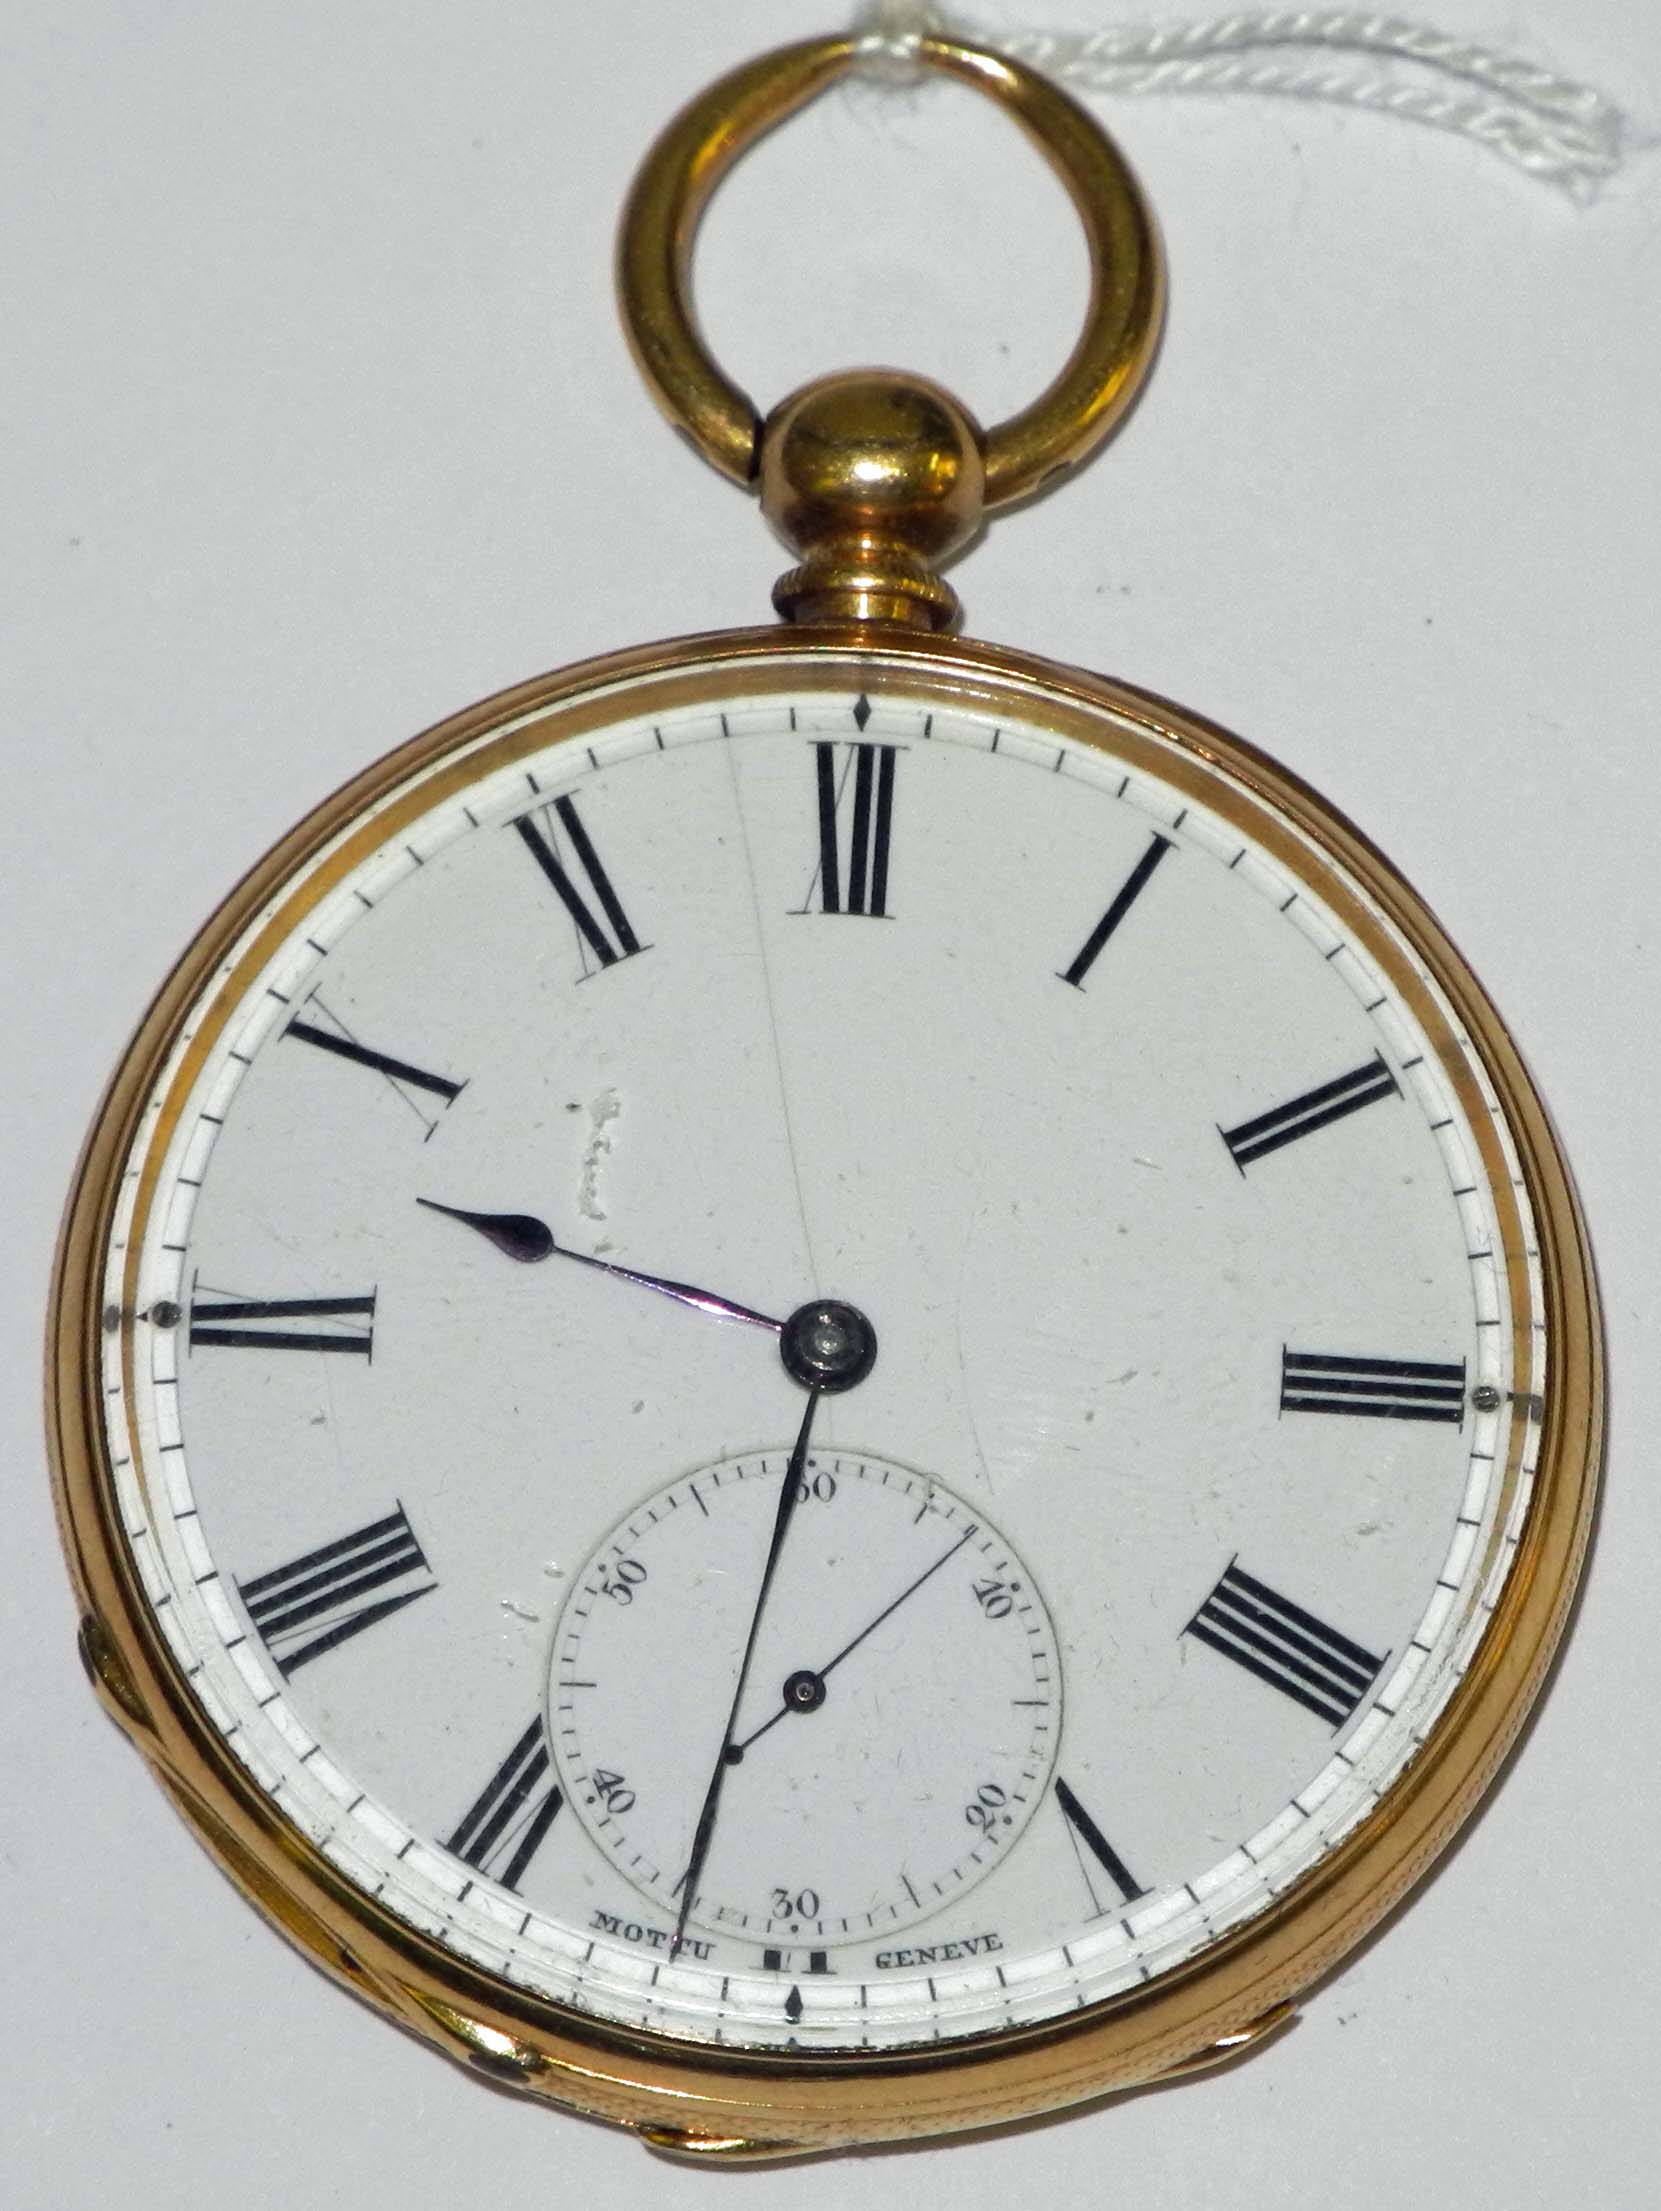 A late 19th century 18ct gold cased open faced pocket watch by Mottu Geneve, having a Roman